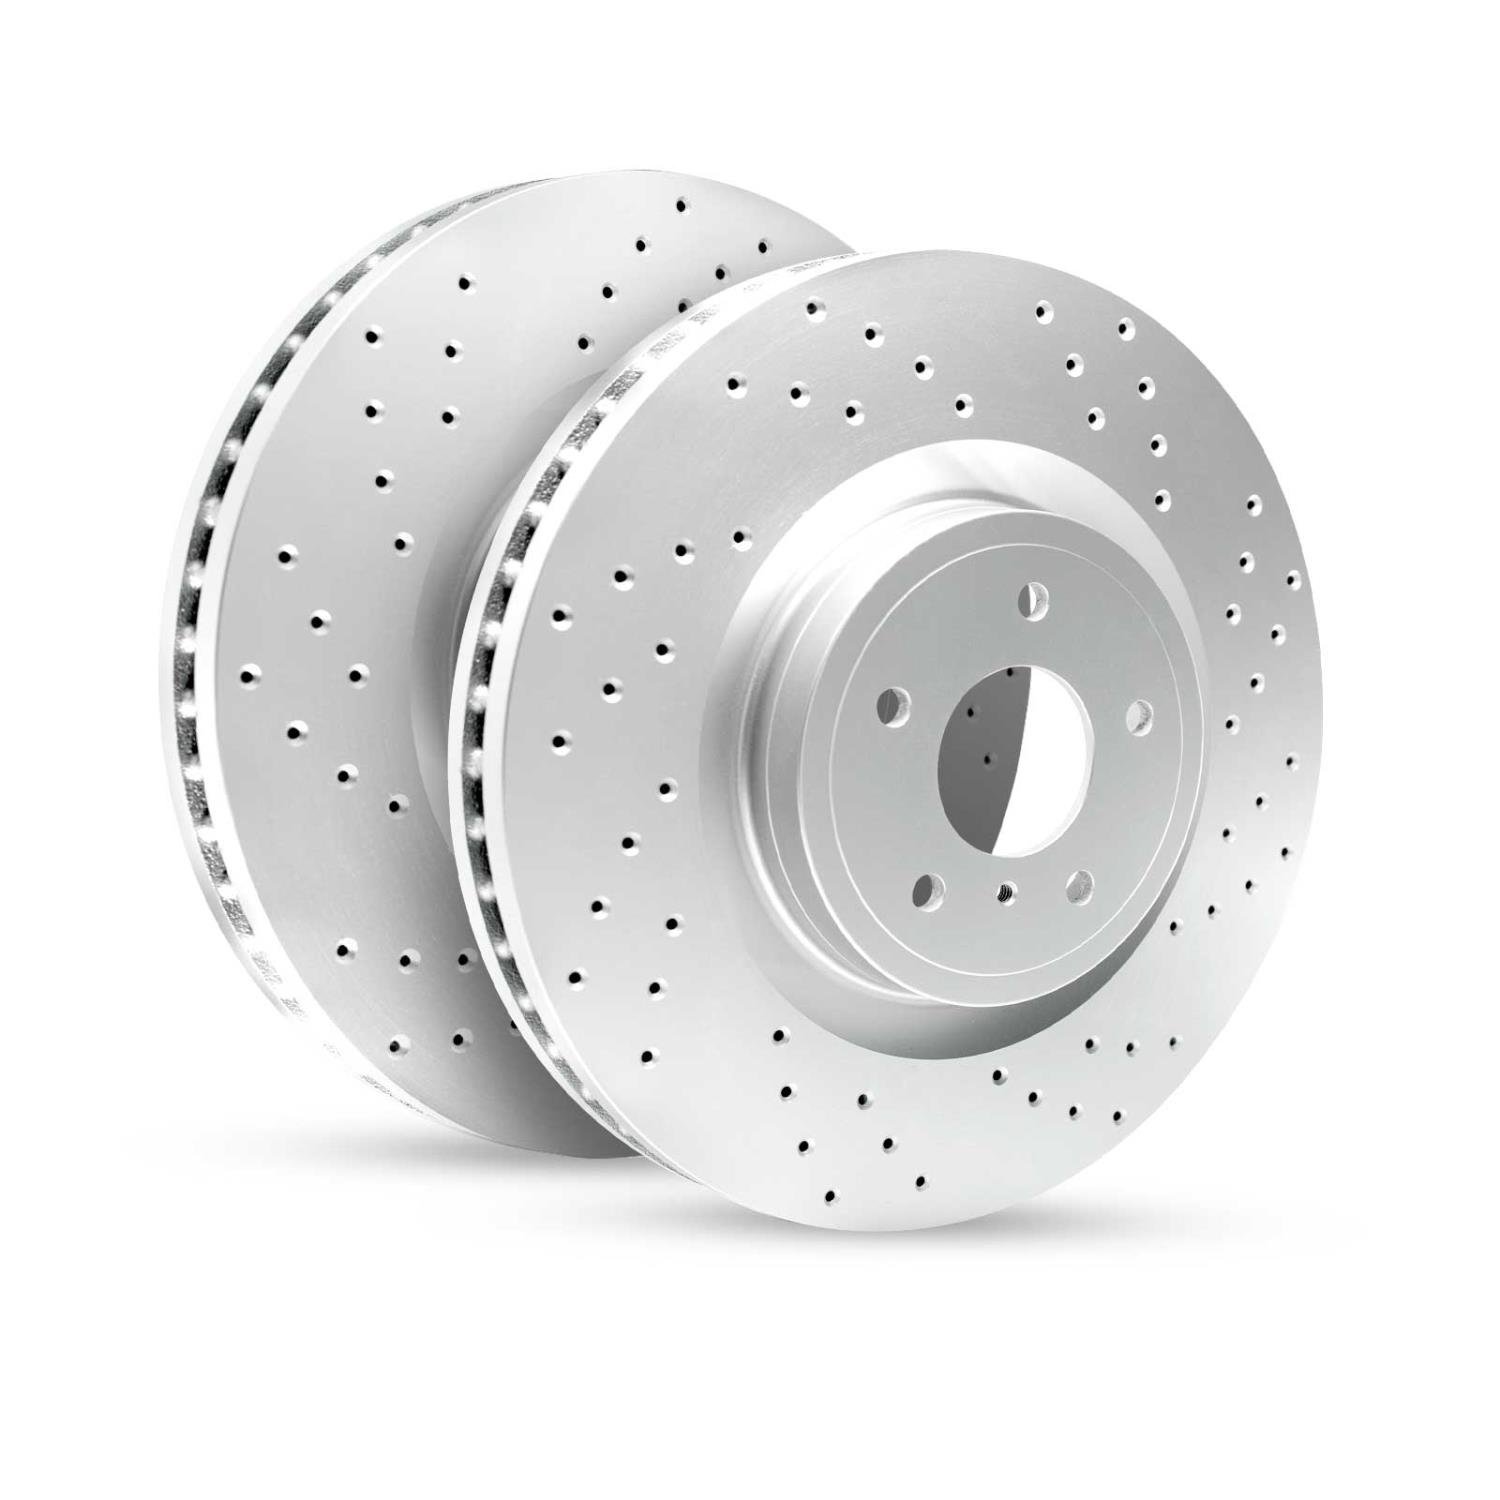 GEO-Carbon Drilled/Slotted Rotors, 2013-2014 Ford/Mazda, Position: Rear